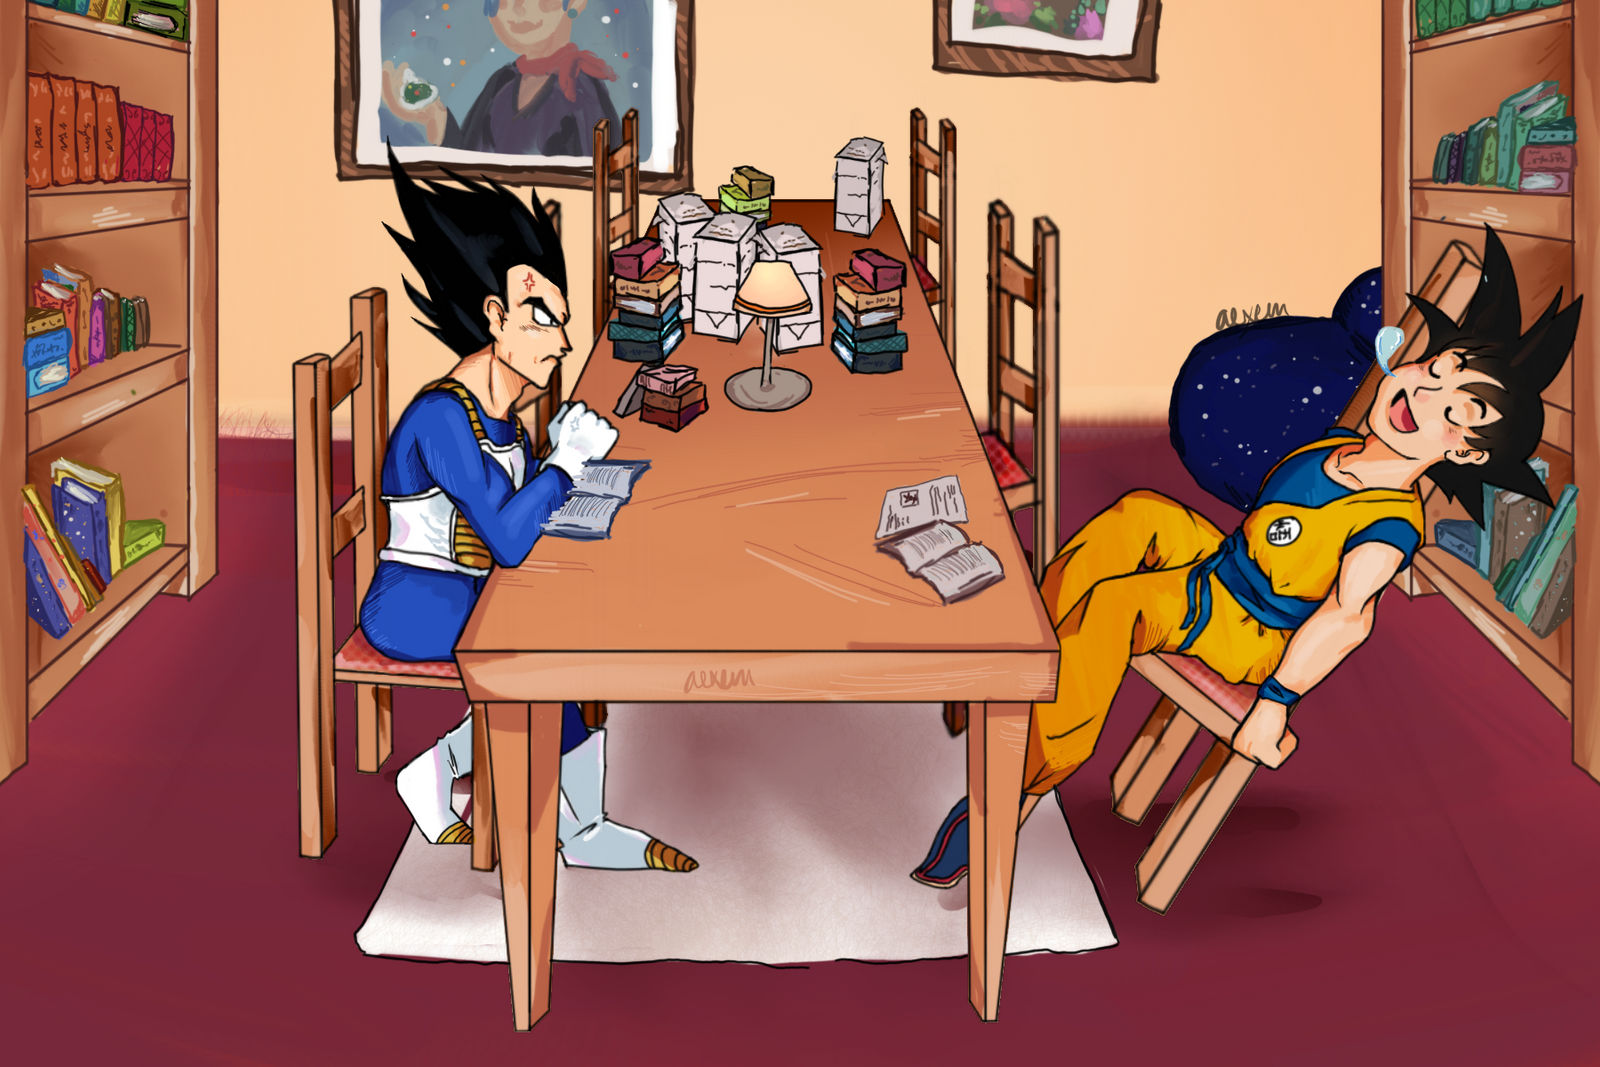 DRAGON BALL Z Androides Nro16,17 y 18 by dibujARTpe on DeviantArt